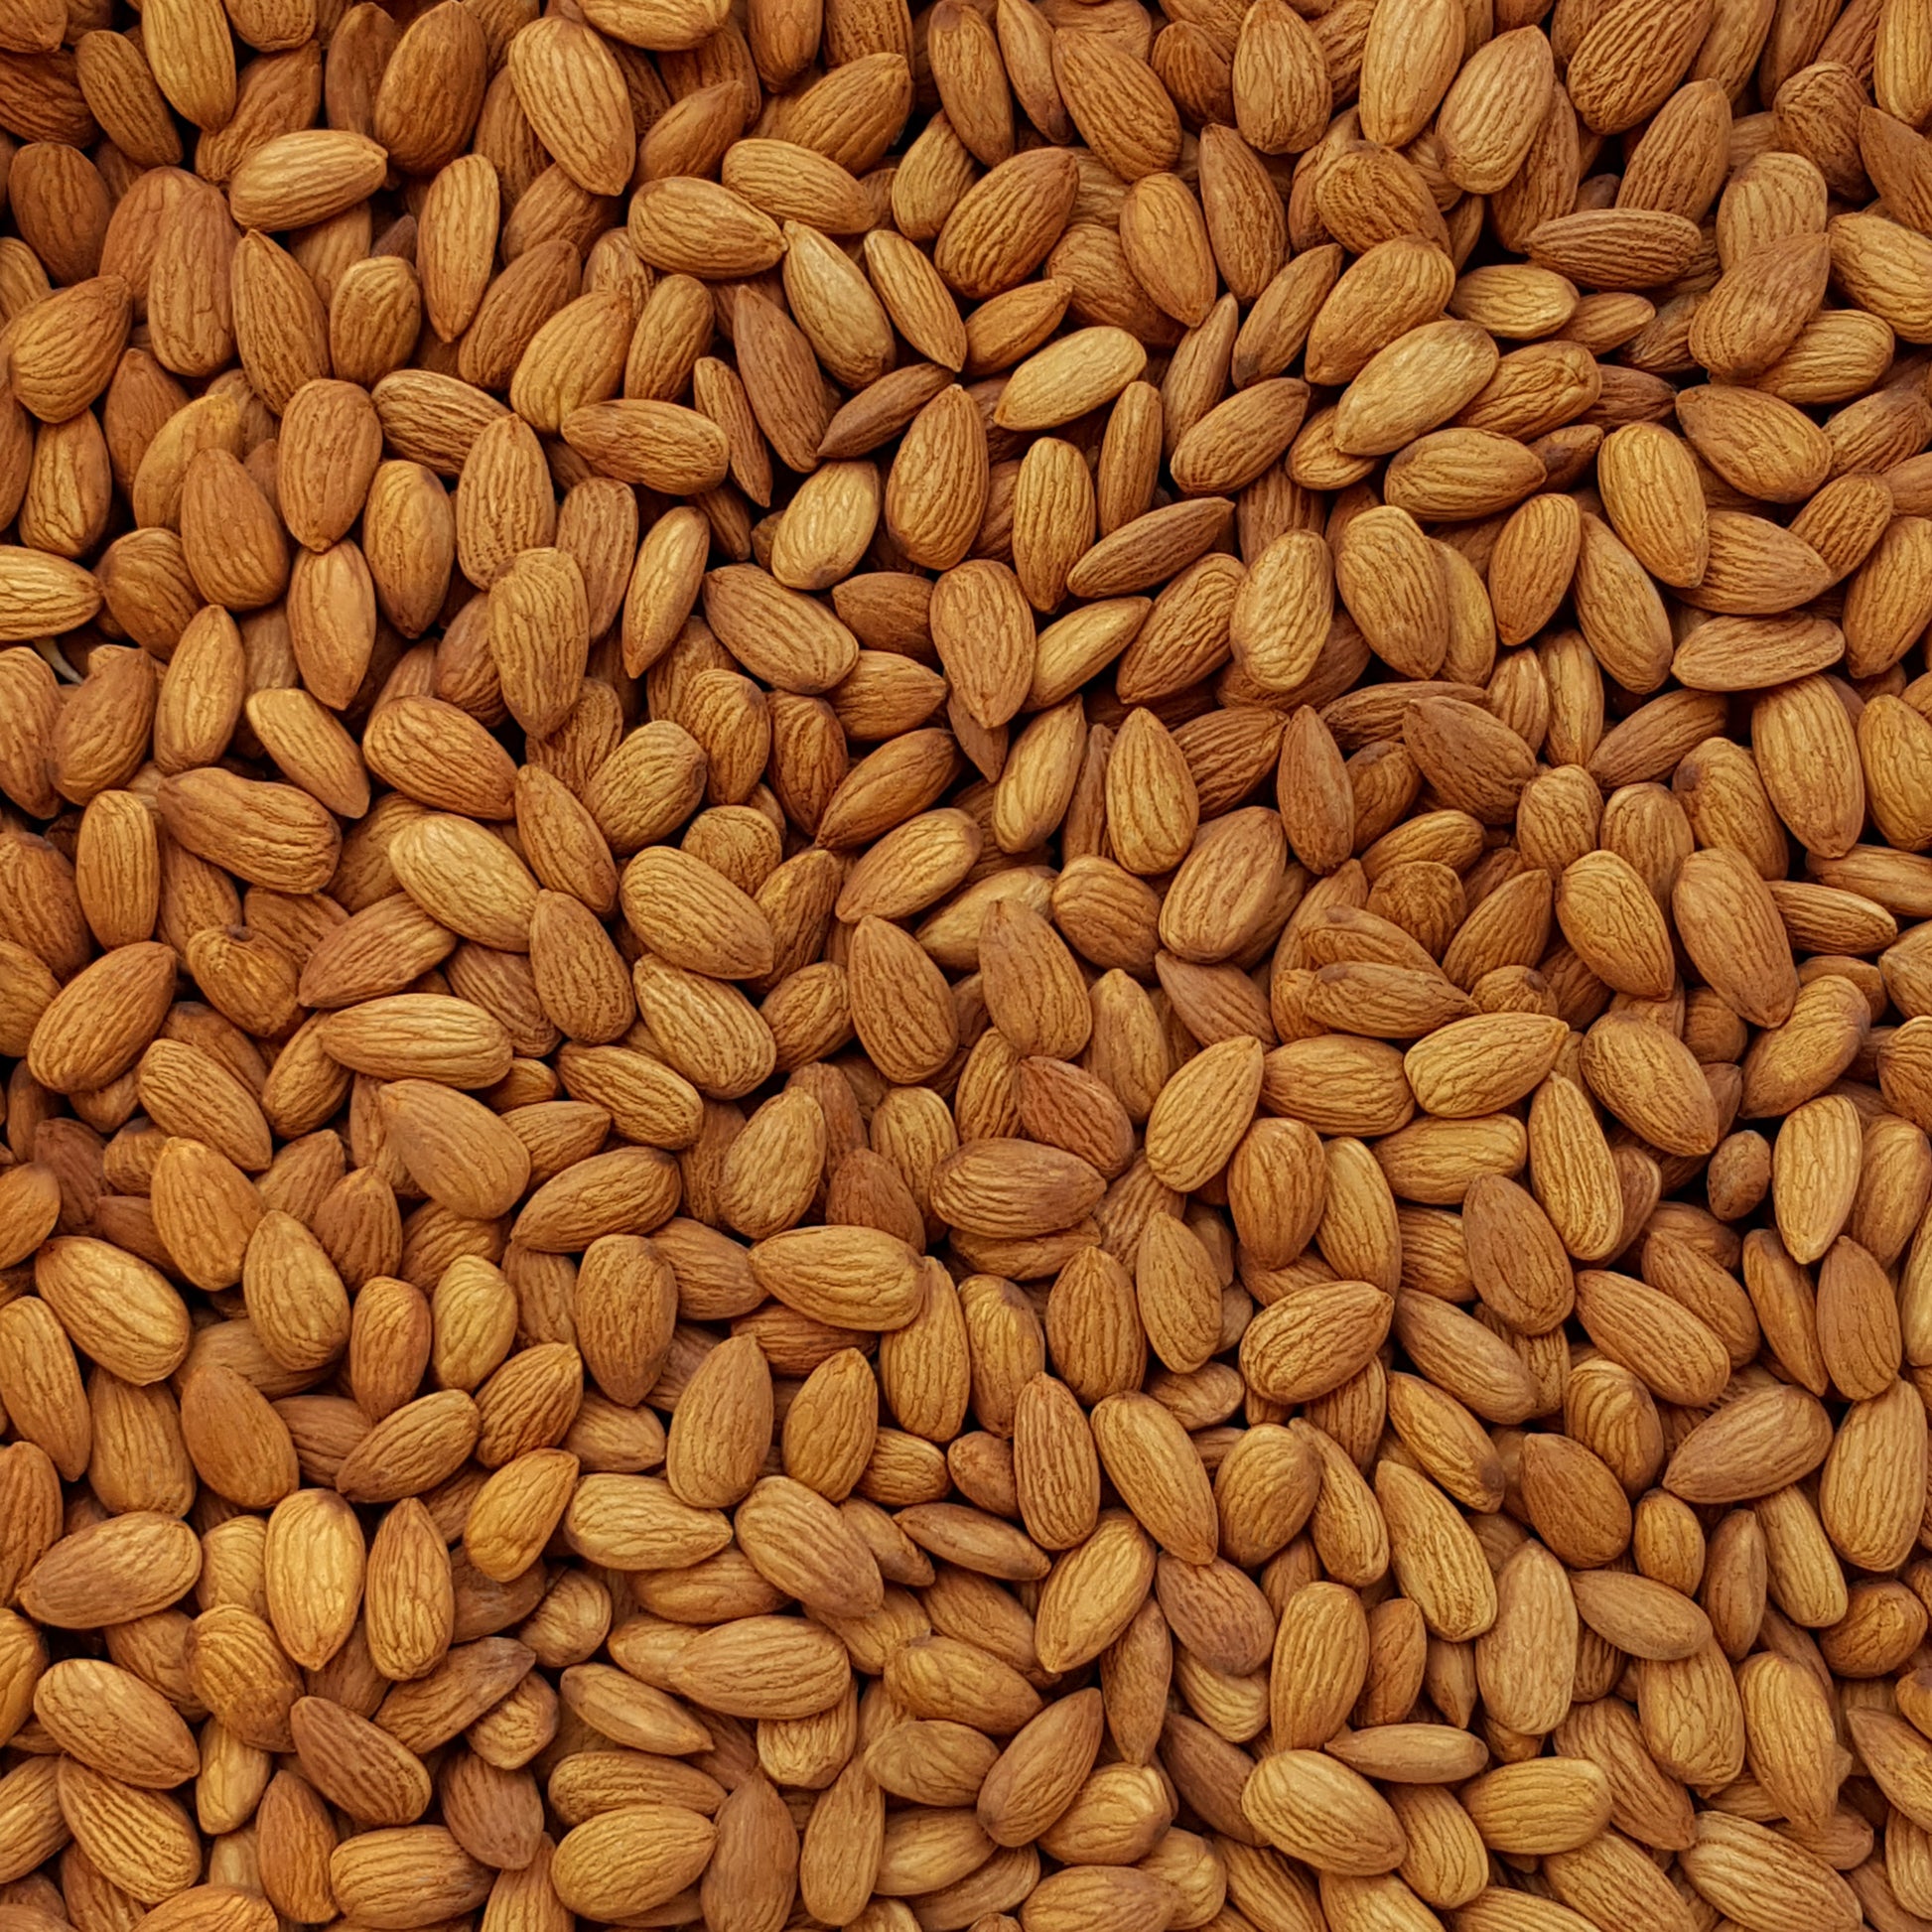 Full frame overhead image of BY NATURE Almonds - Nonpareil Supreme variety, raw, unpasteurised.